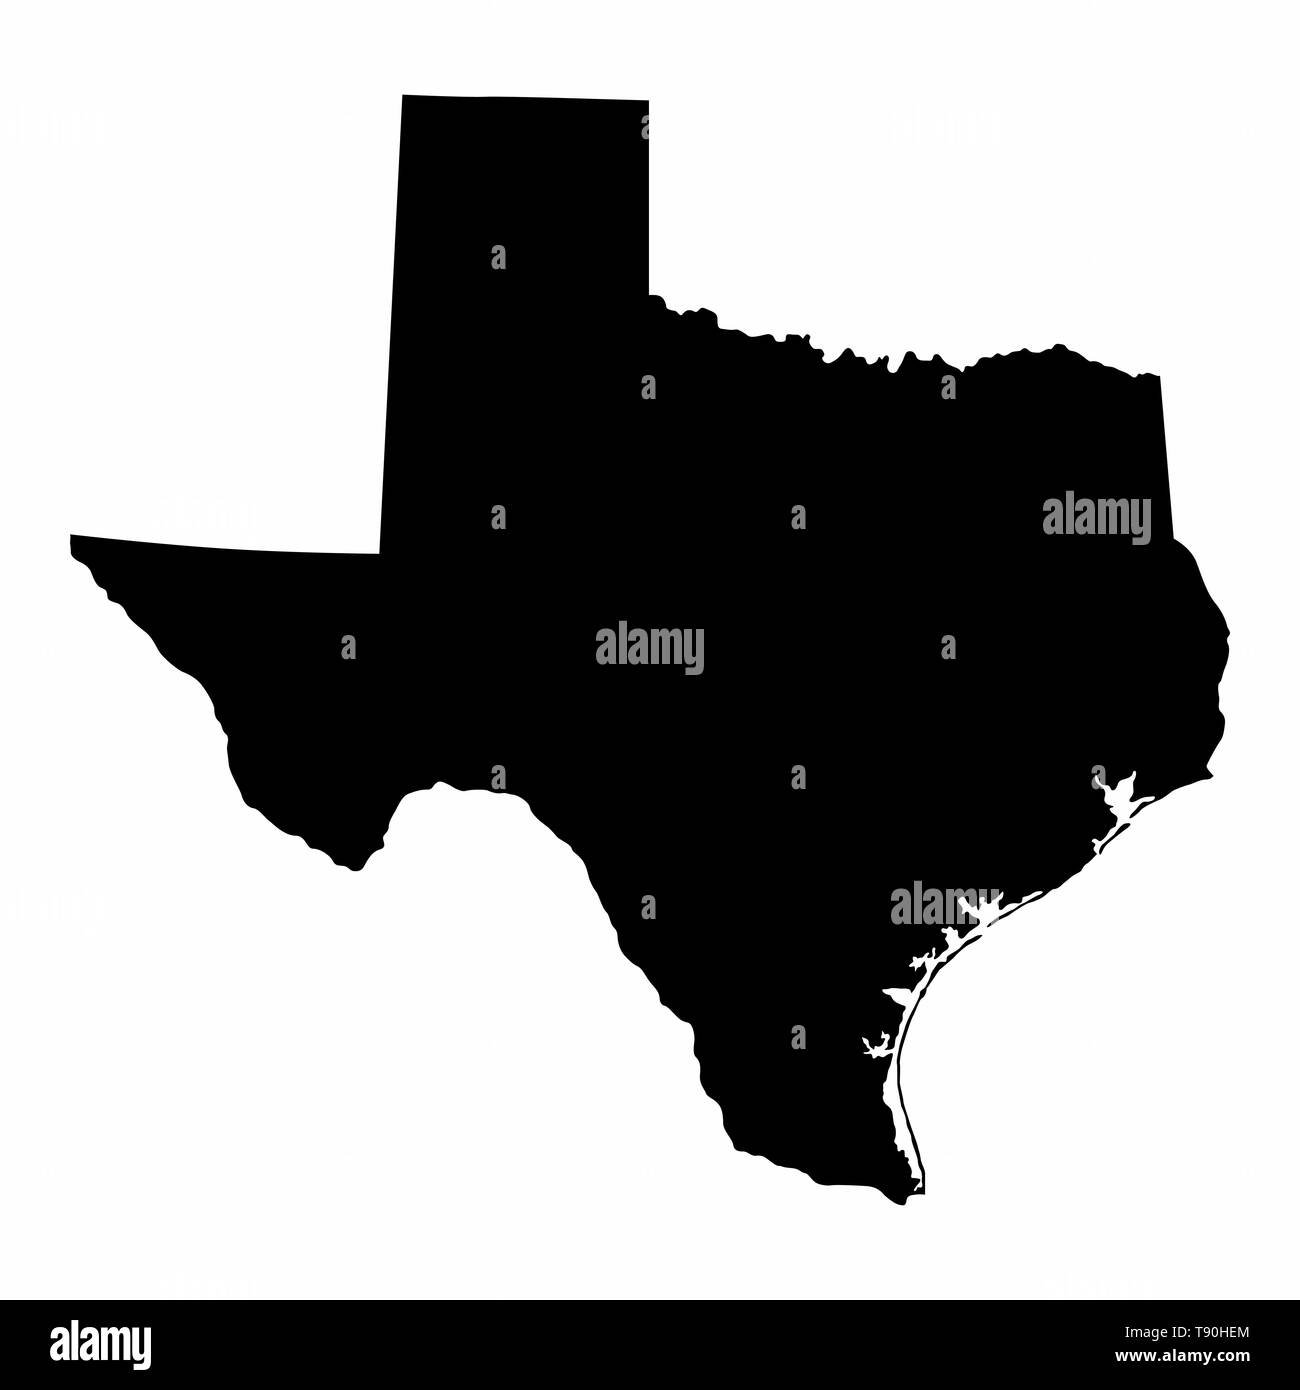 Texas map dark silhouette isolated on white background Stock Vector